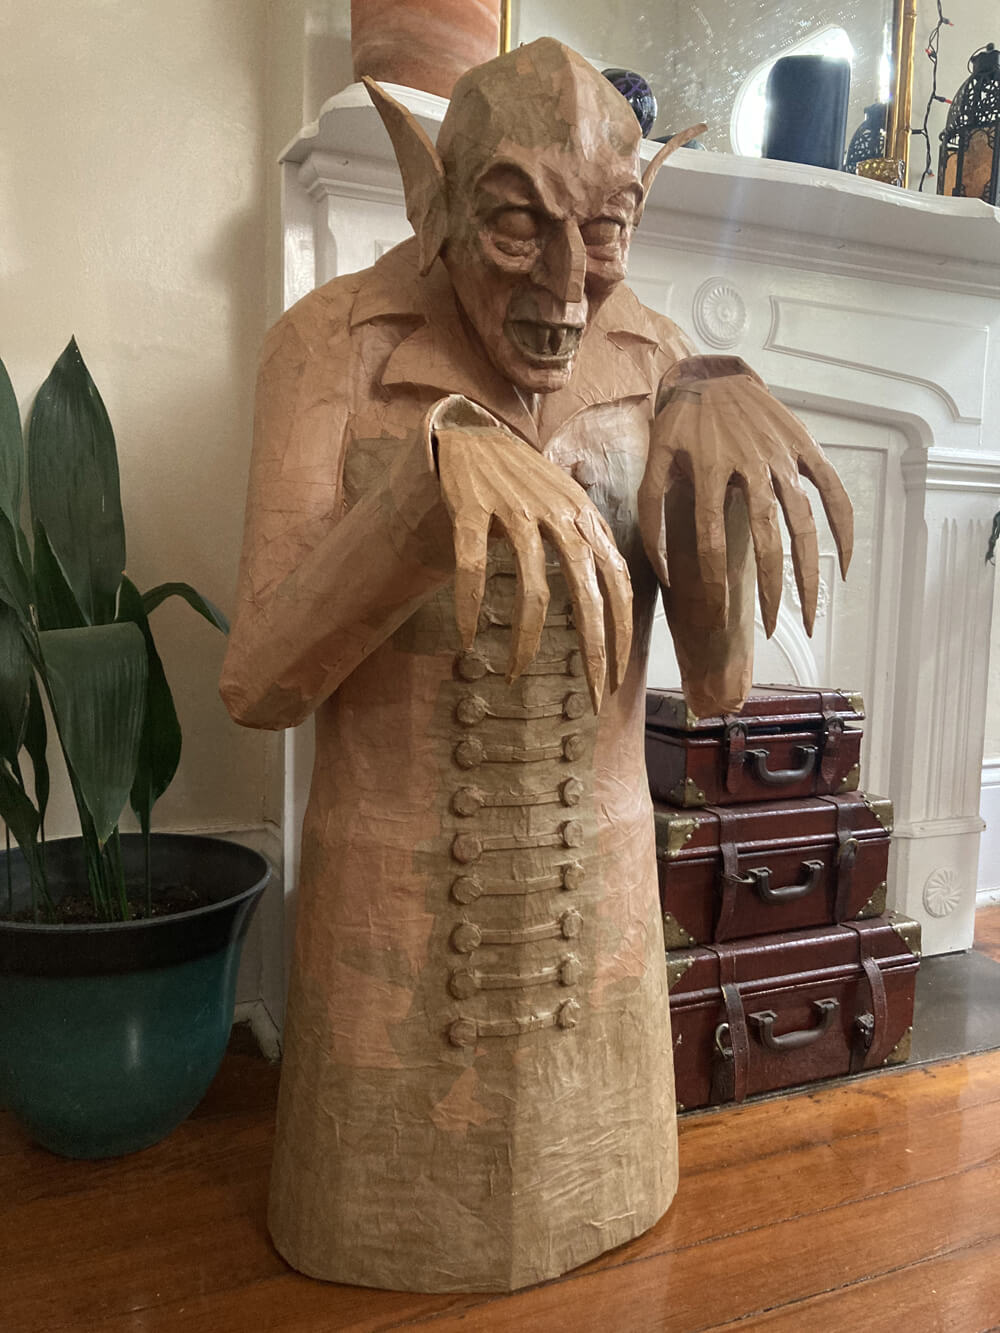 DIY Count Orlok statue - adding buttons and hands